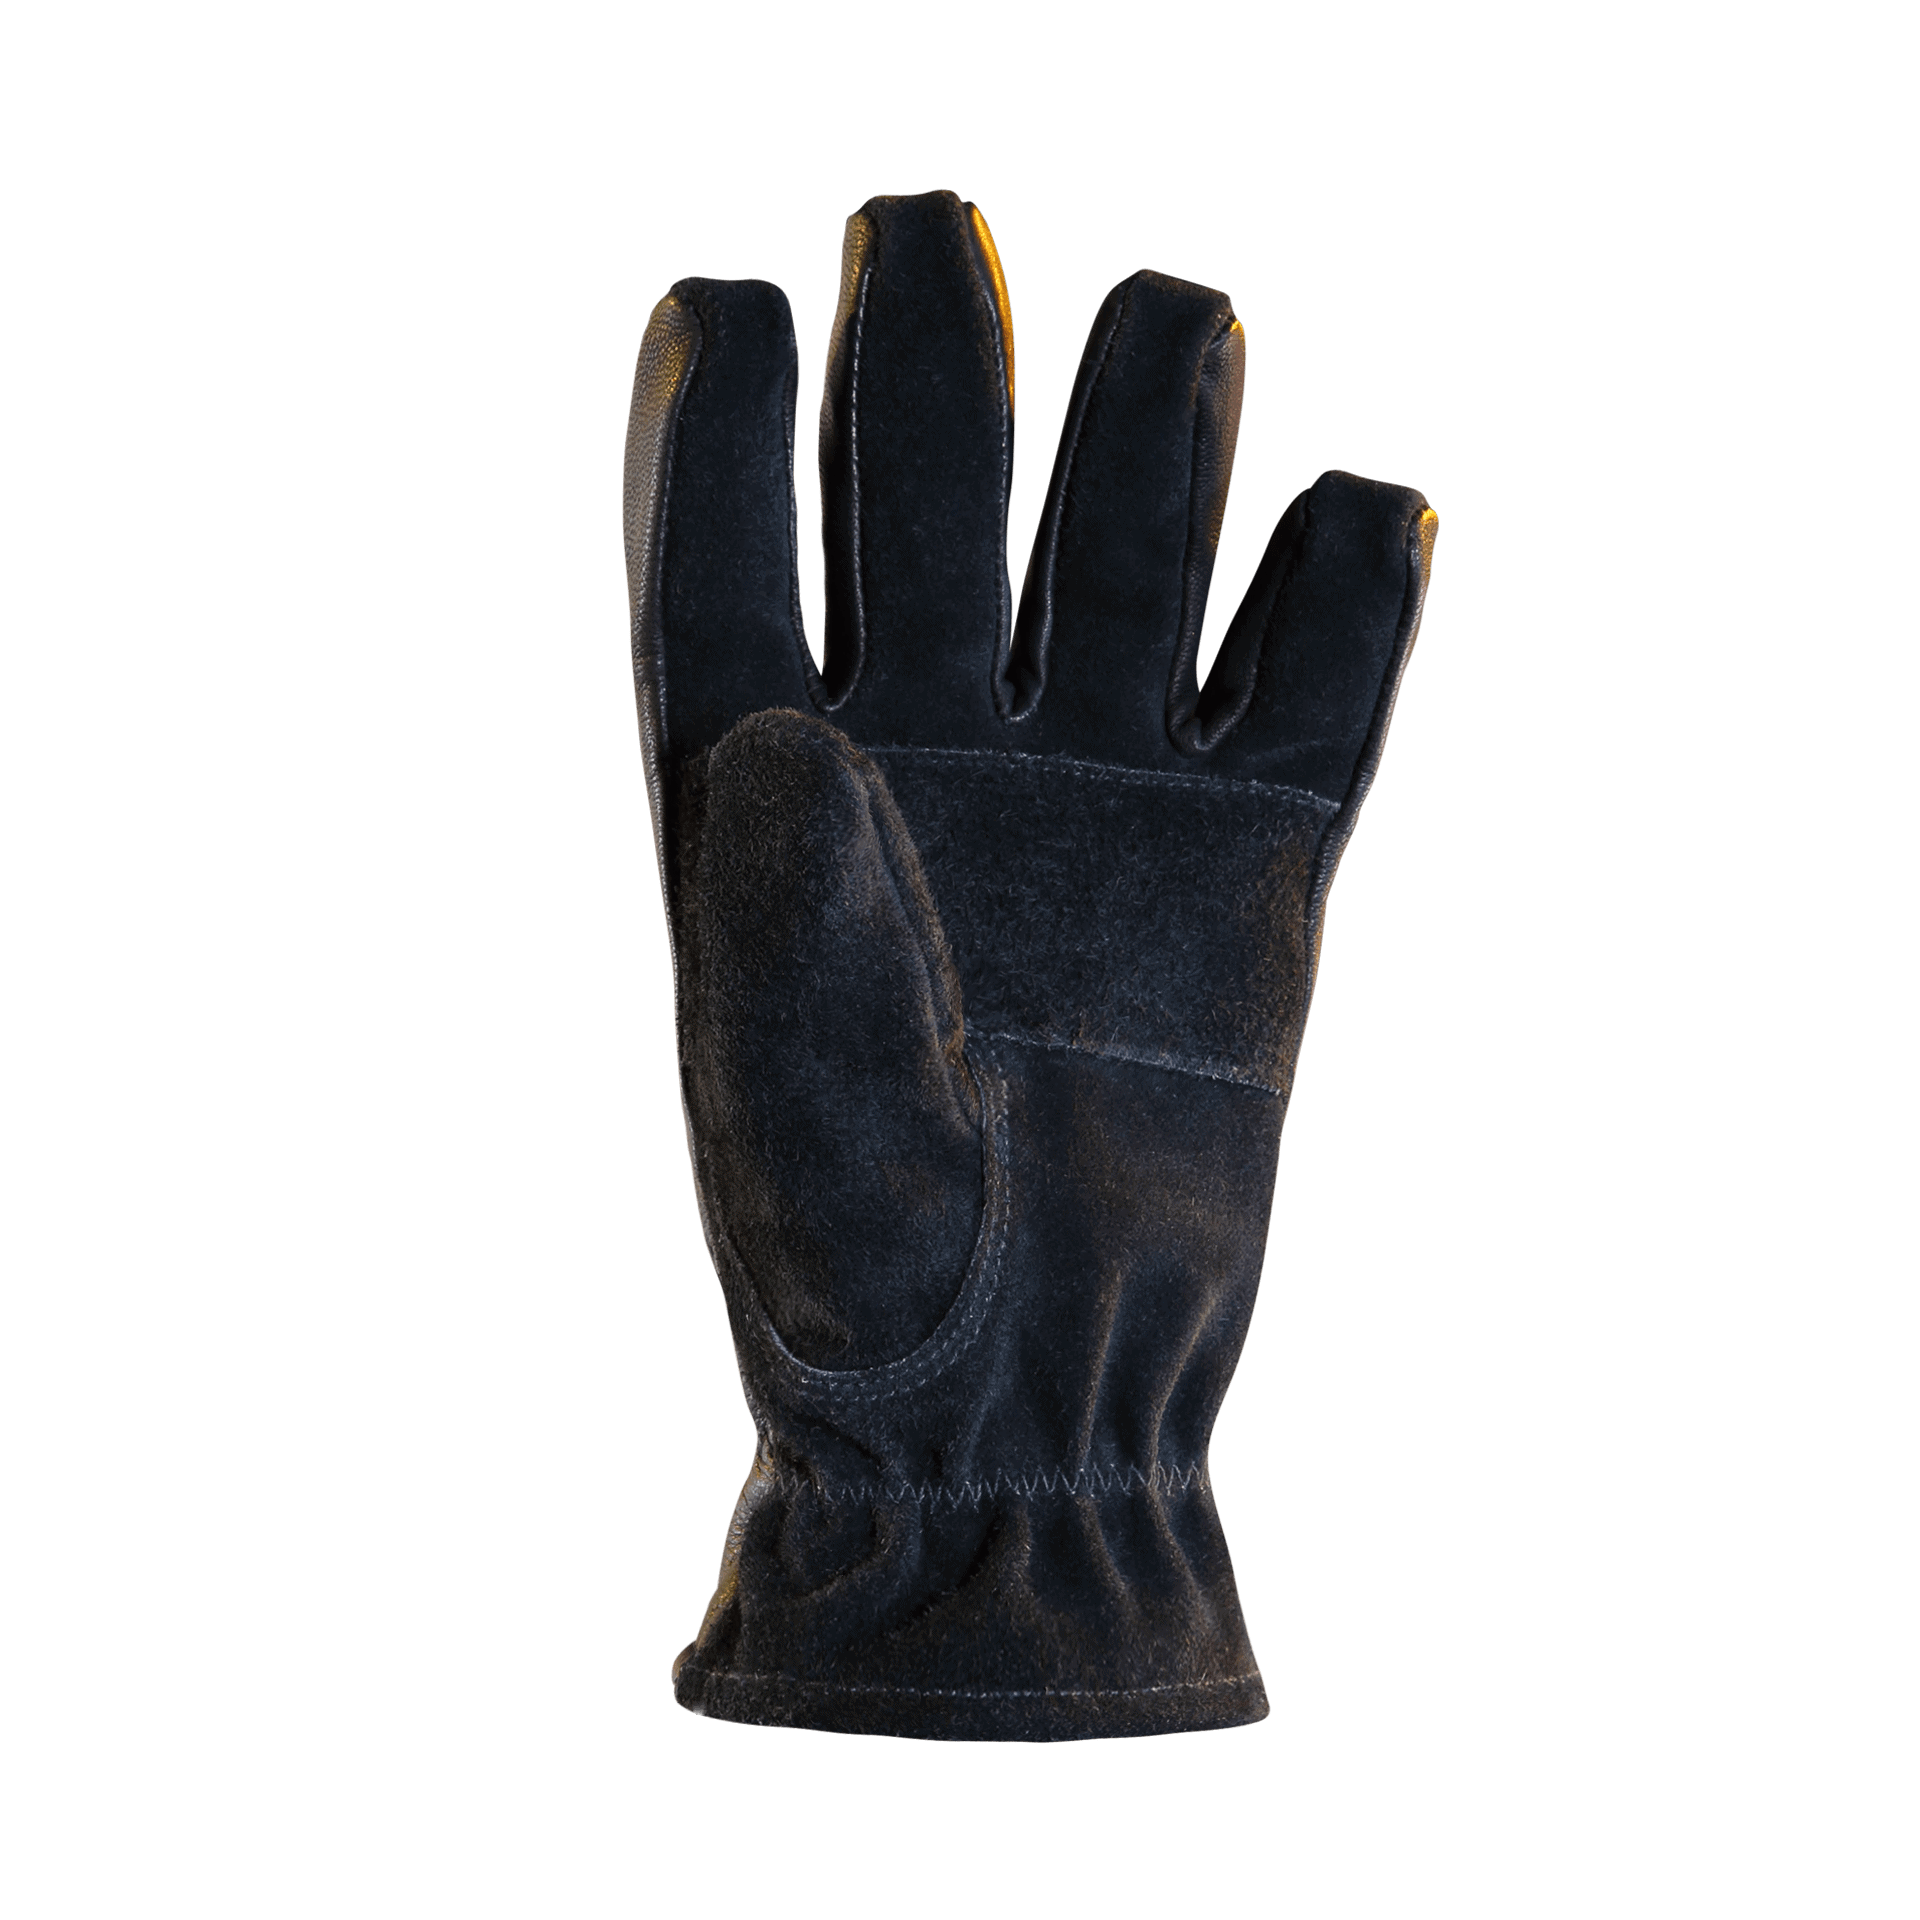 Fire-Dex Dex-Pro 3D Leather Glove  | Fire Store | Fuego Fire Center | Firefighter Gear | ur gloves are perfected to bring you superior comfort, dexterity, and thermal protection to meet the demands of the job. The Dex-Pro’s three-dimensional design is paired with materials that make the fit feel so natural you'll wonder why you didn't switch sooner. 